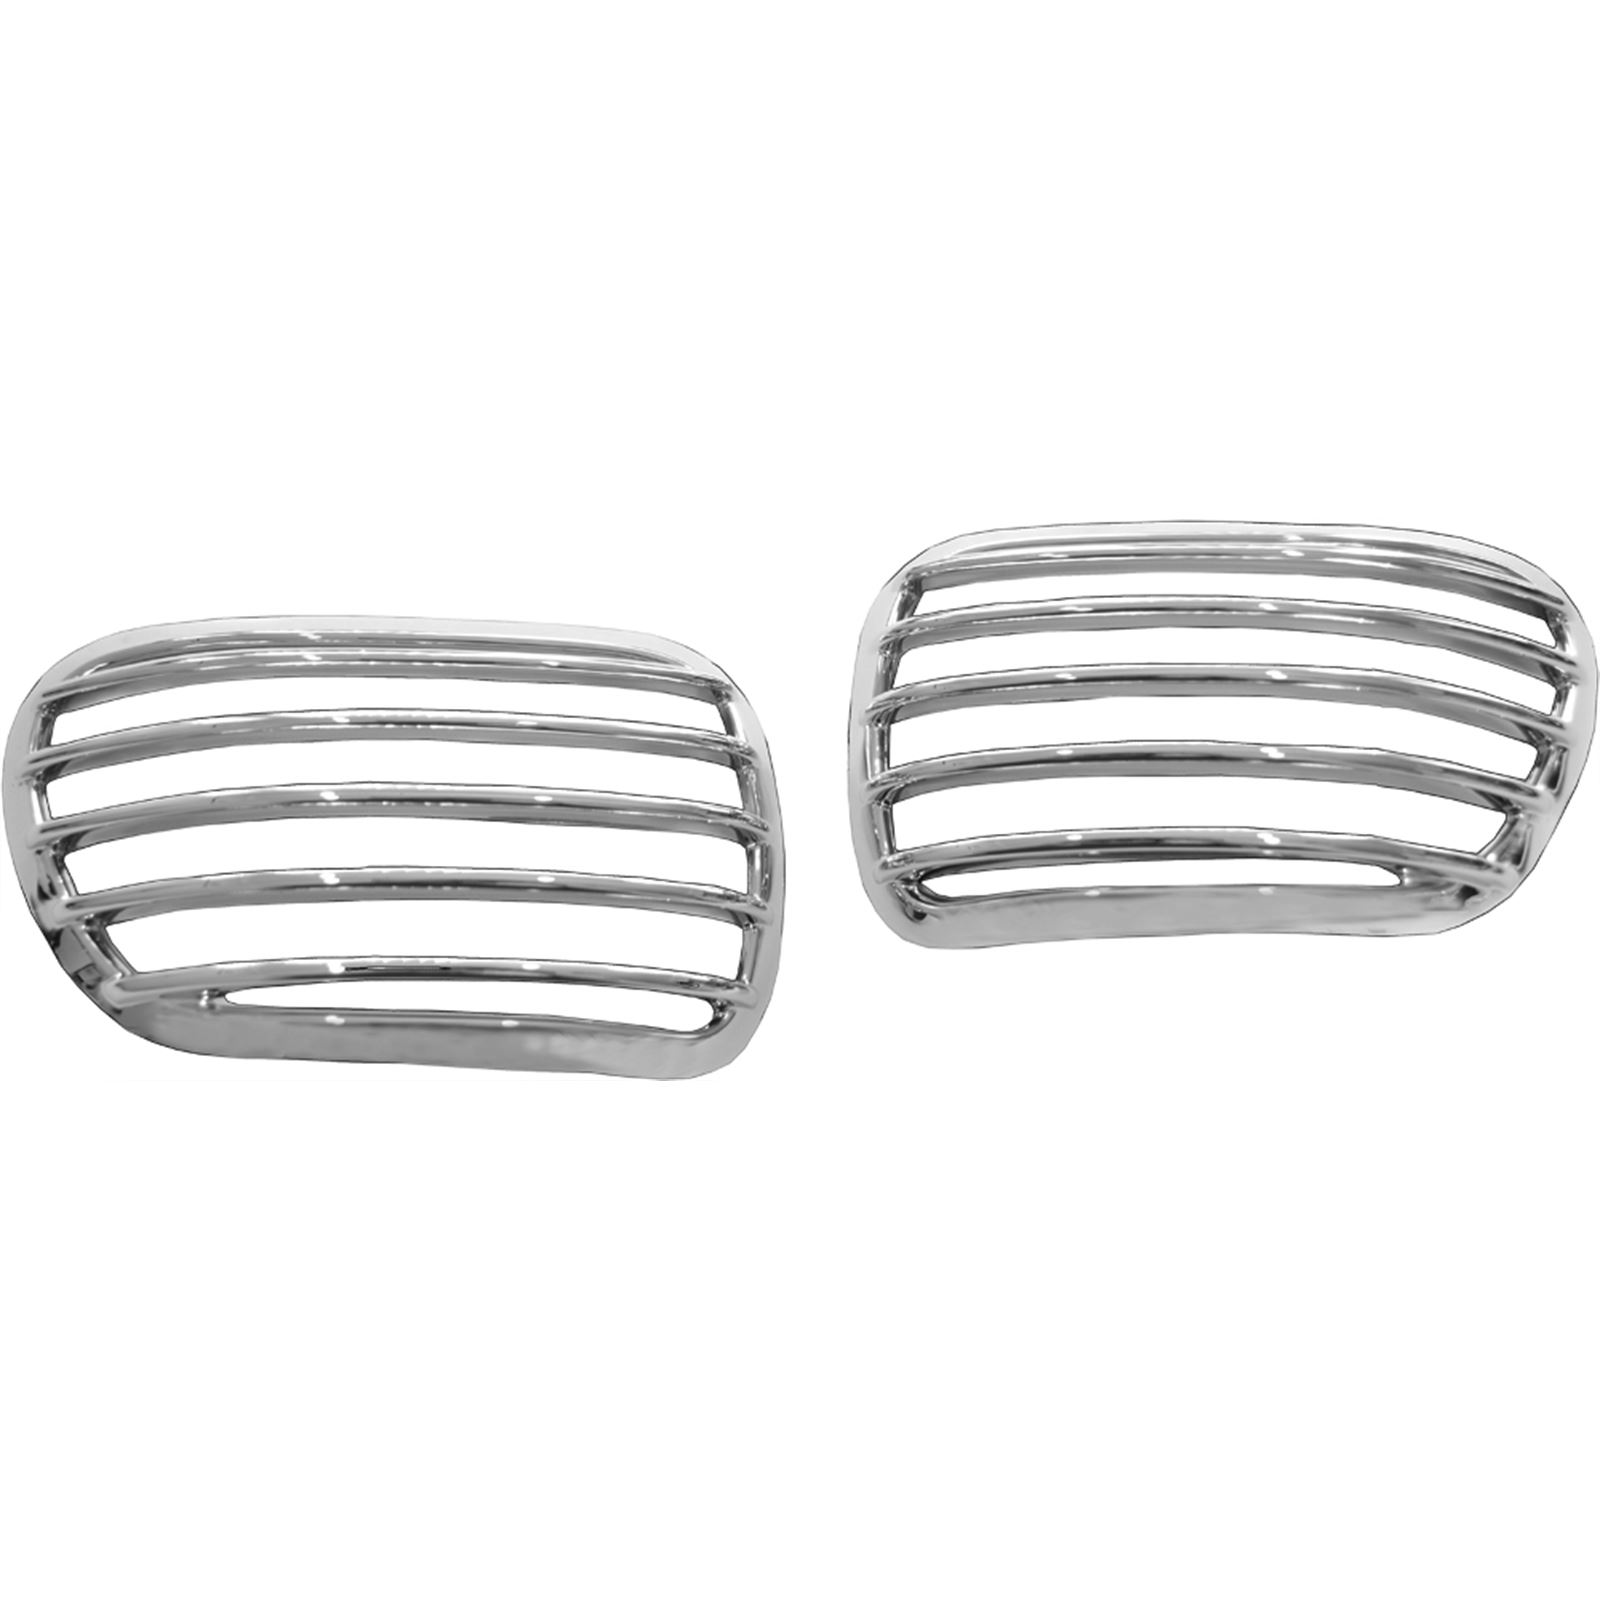 Socalmotogear Front Turn Signal Grill